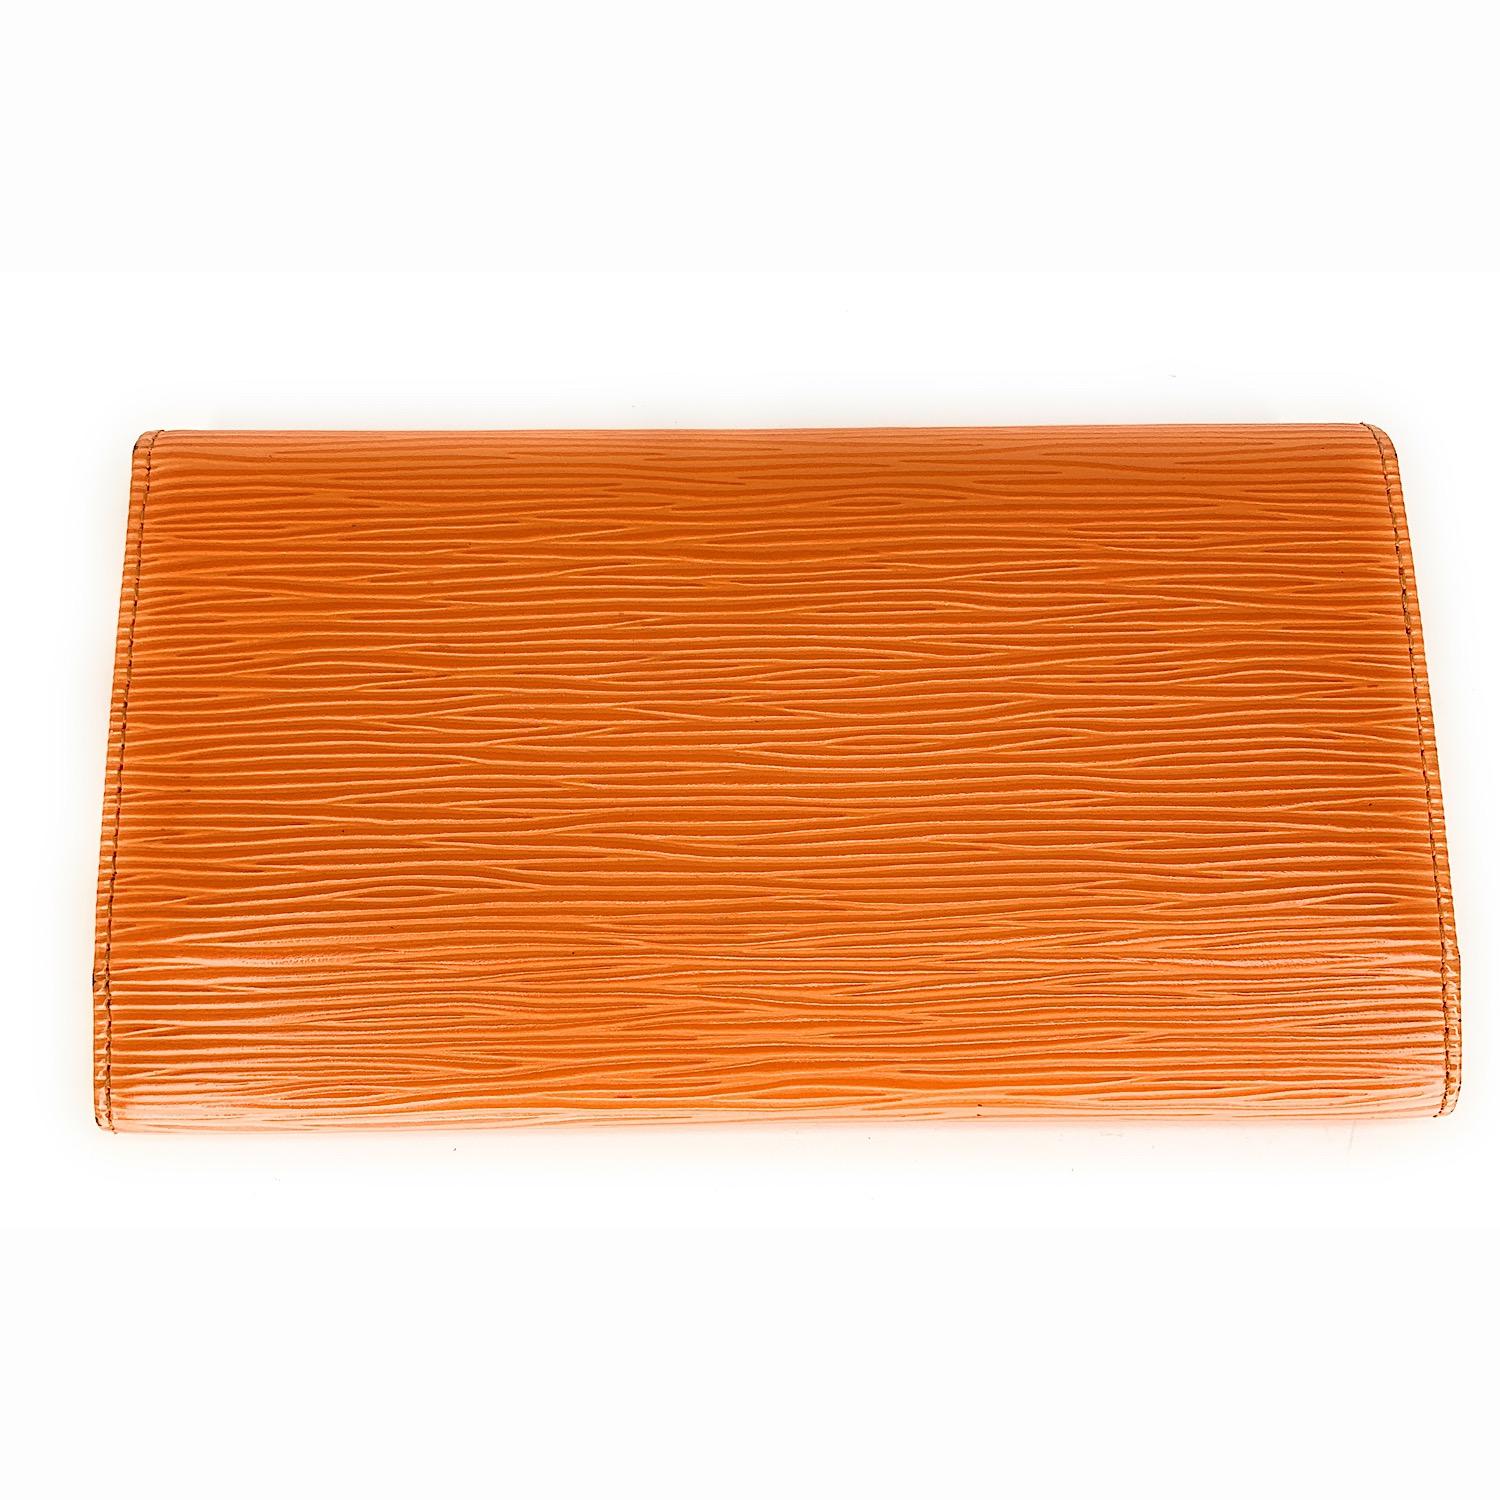 This is a gorgeous wallet from Louis Vuitton. Crafted from orange Louis Vuitton Epi leather, this wallet is both practical and fashionable. Its interior, secured with a stud closure, has six credit card slots, two open slip pockets for banknotes,